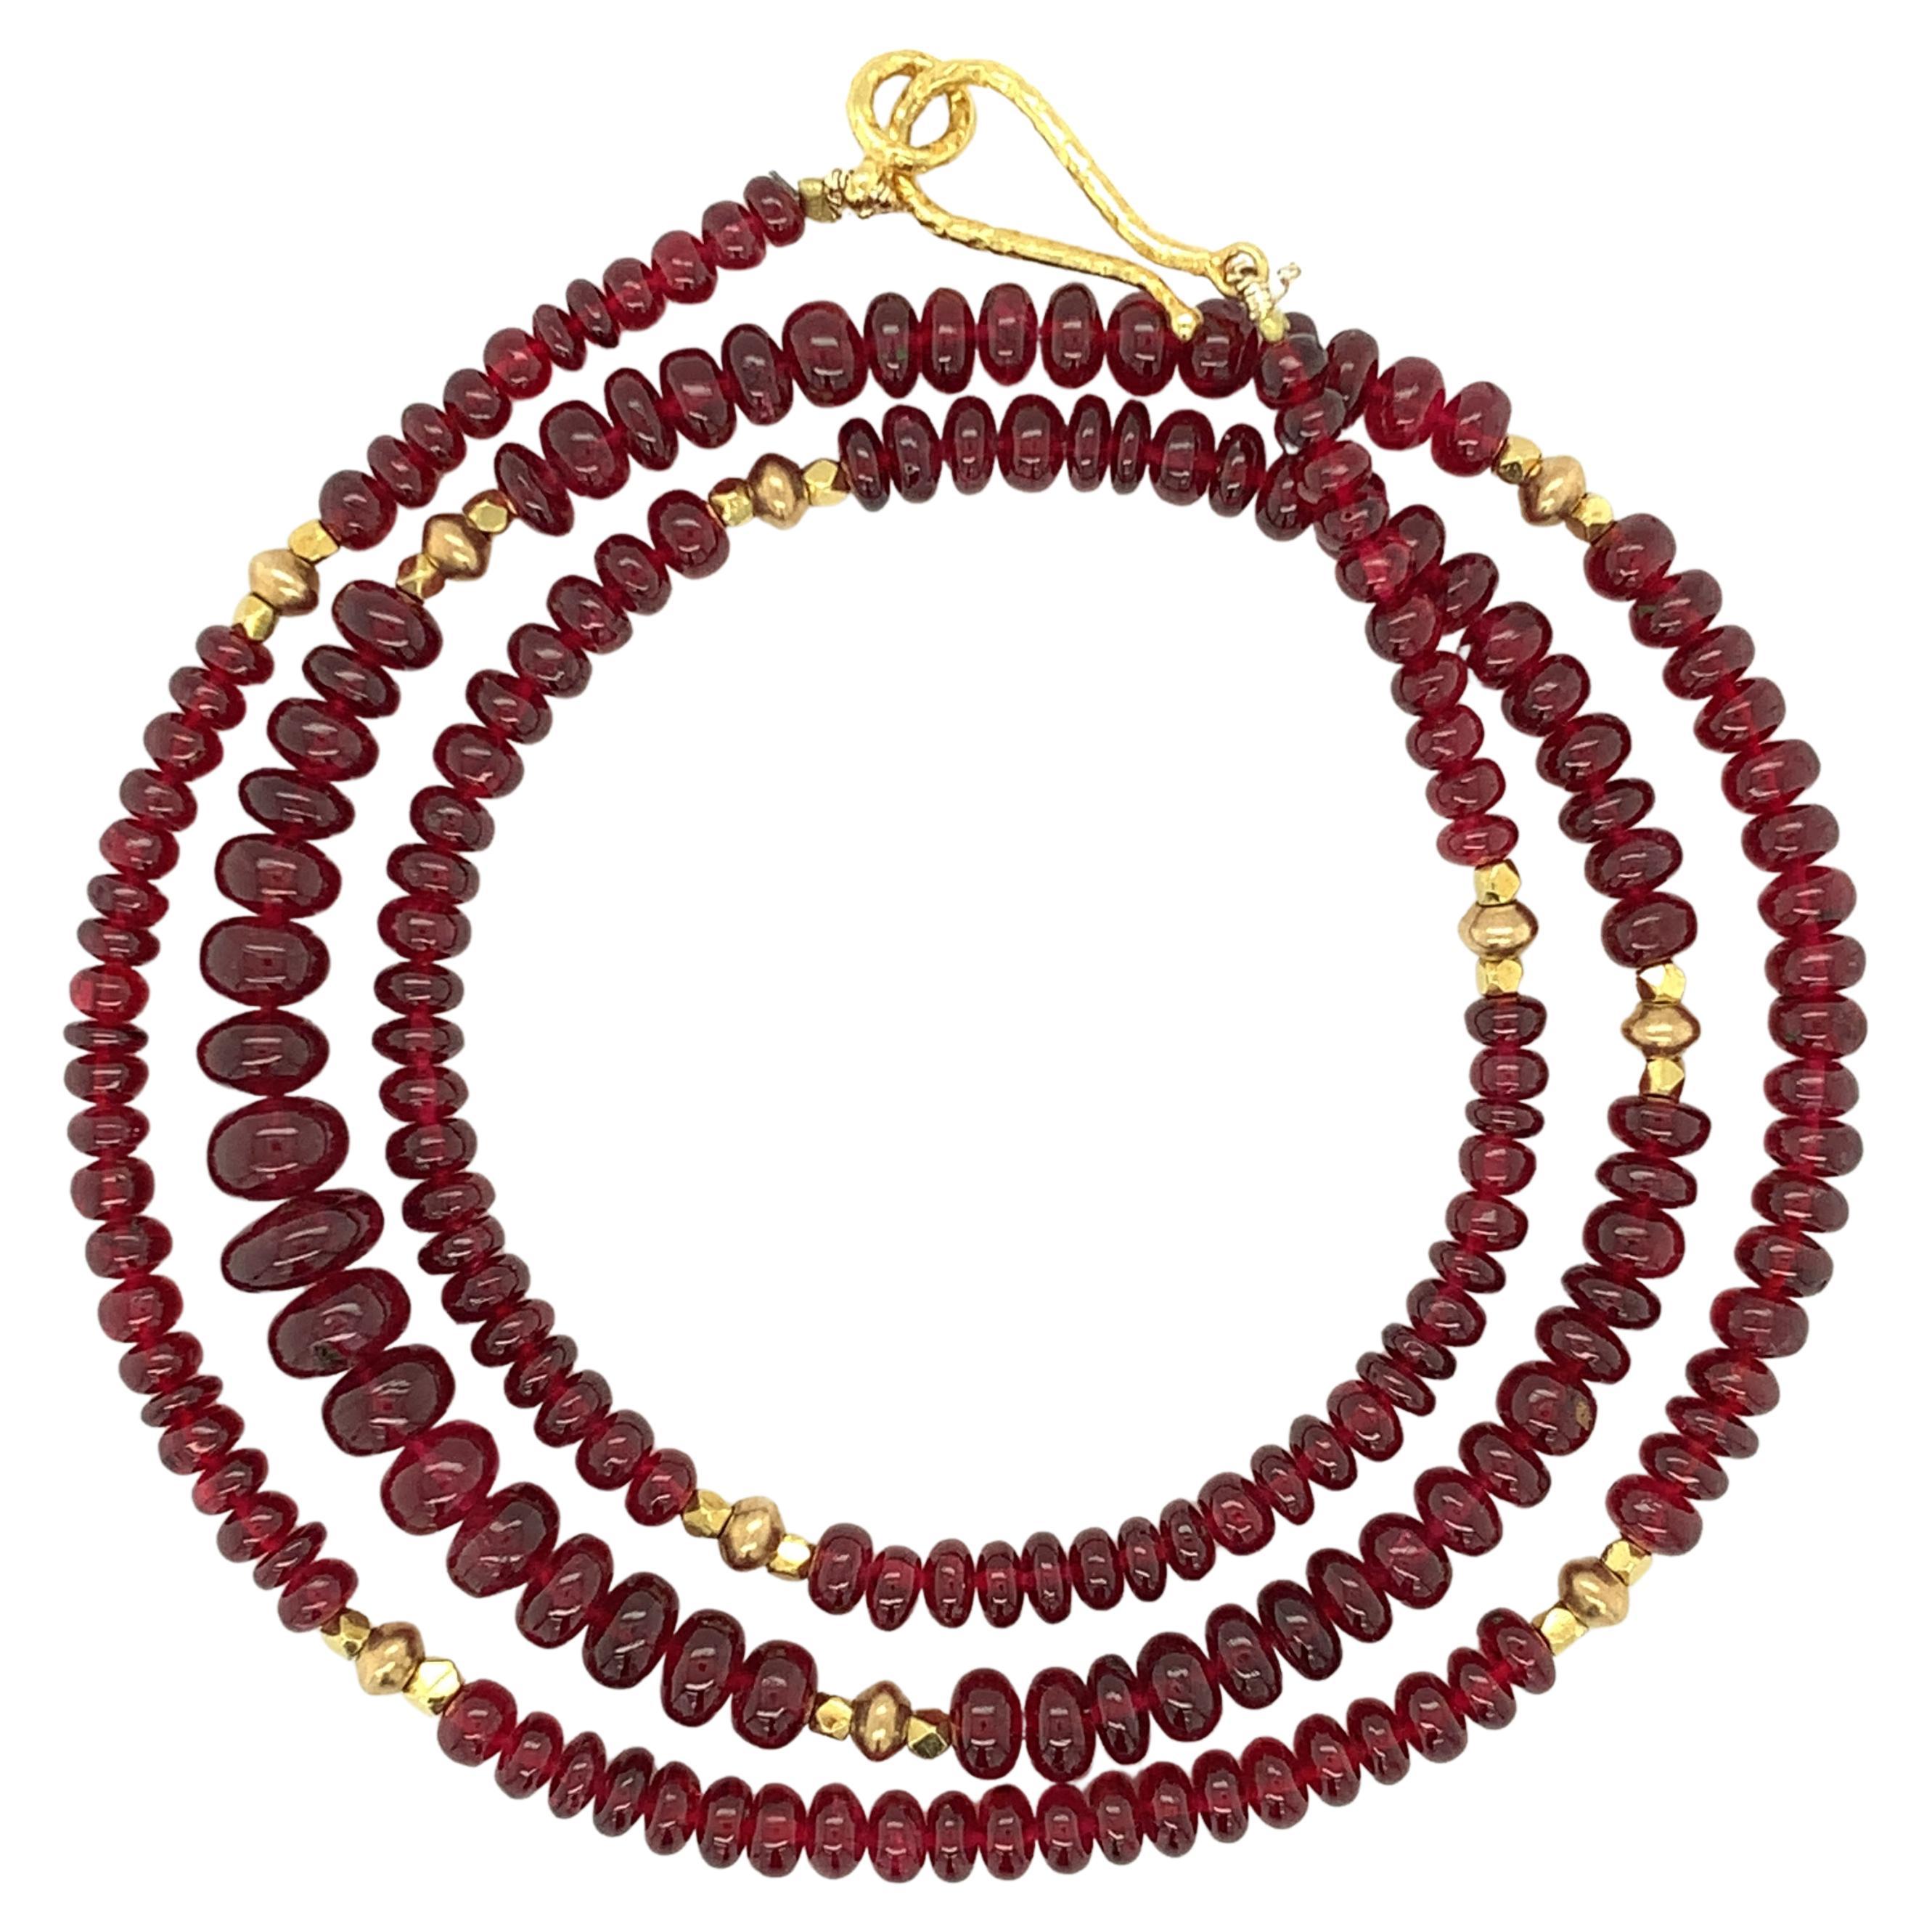 Red Spinel Graduating Bead Necklace with Yellow Gold Spacers, 20 Inches